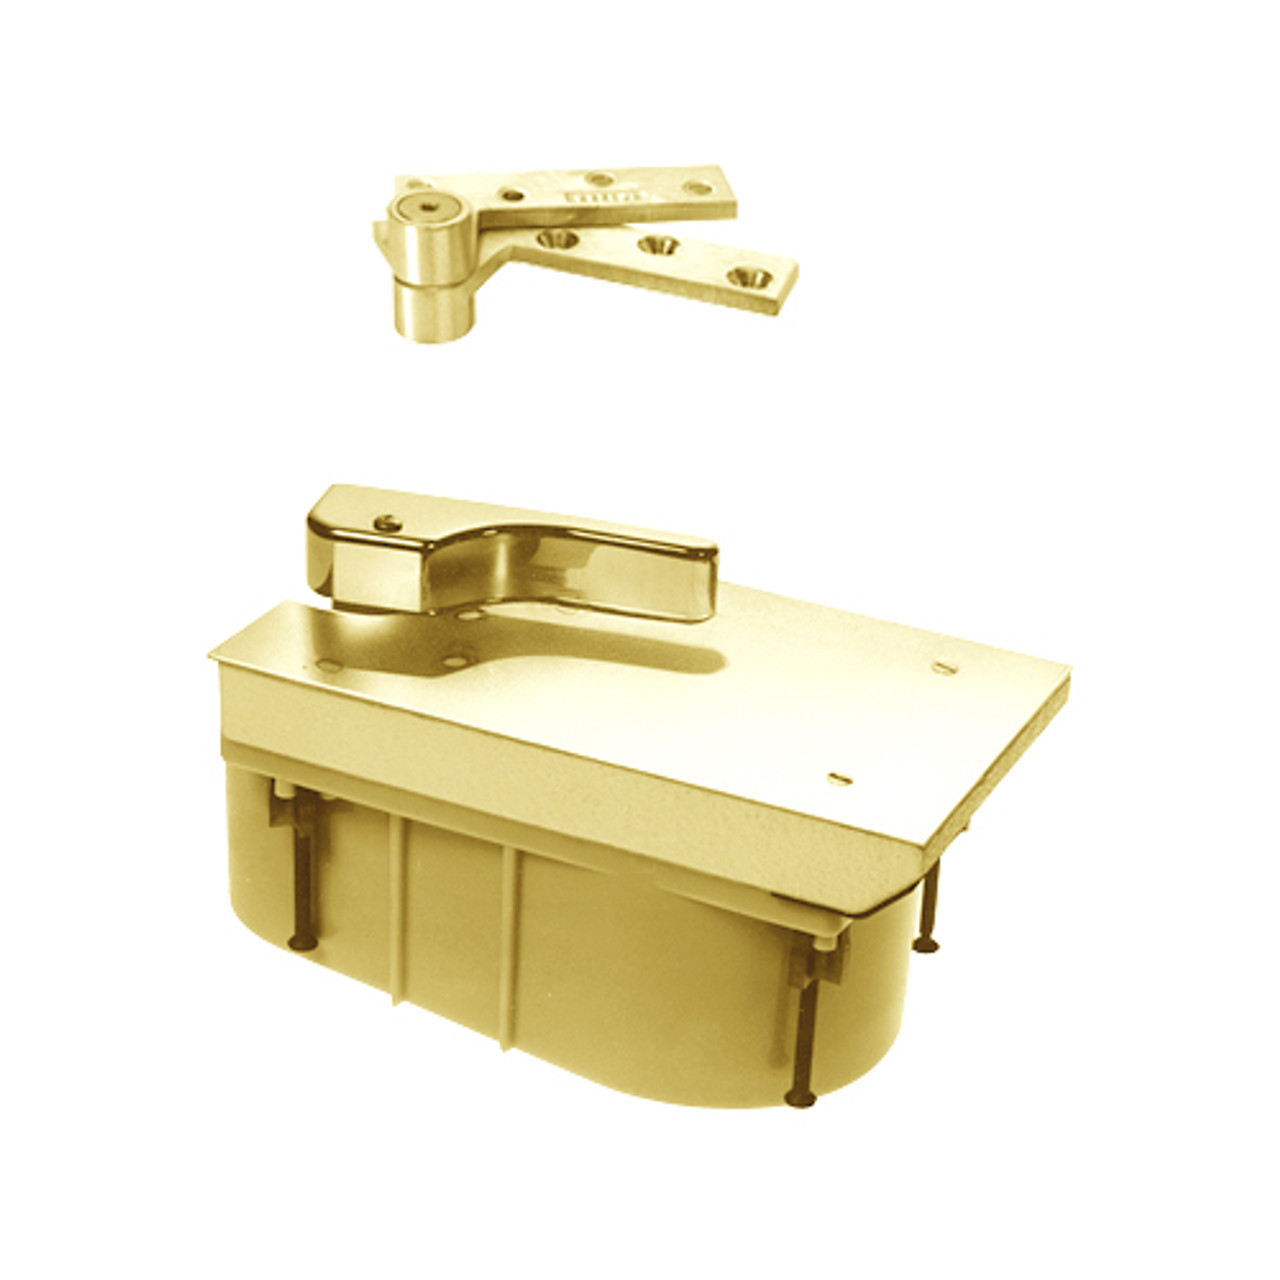 Q27-105S-CWF-LH-605 Rixson 27 Series Heavy Duty Quick Install Offset Hung Floor Closer in Bright Brass Finish